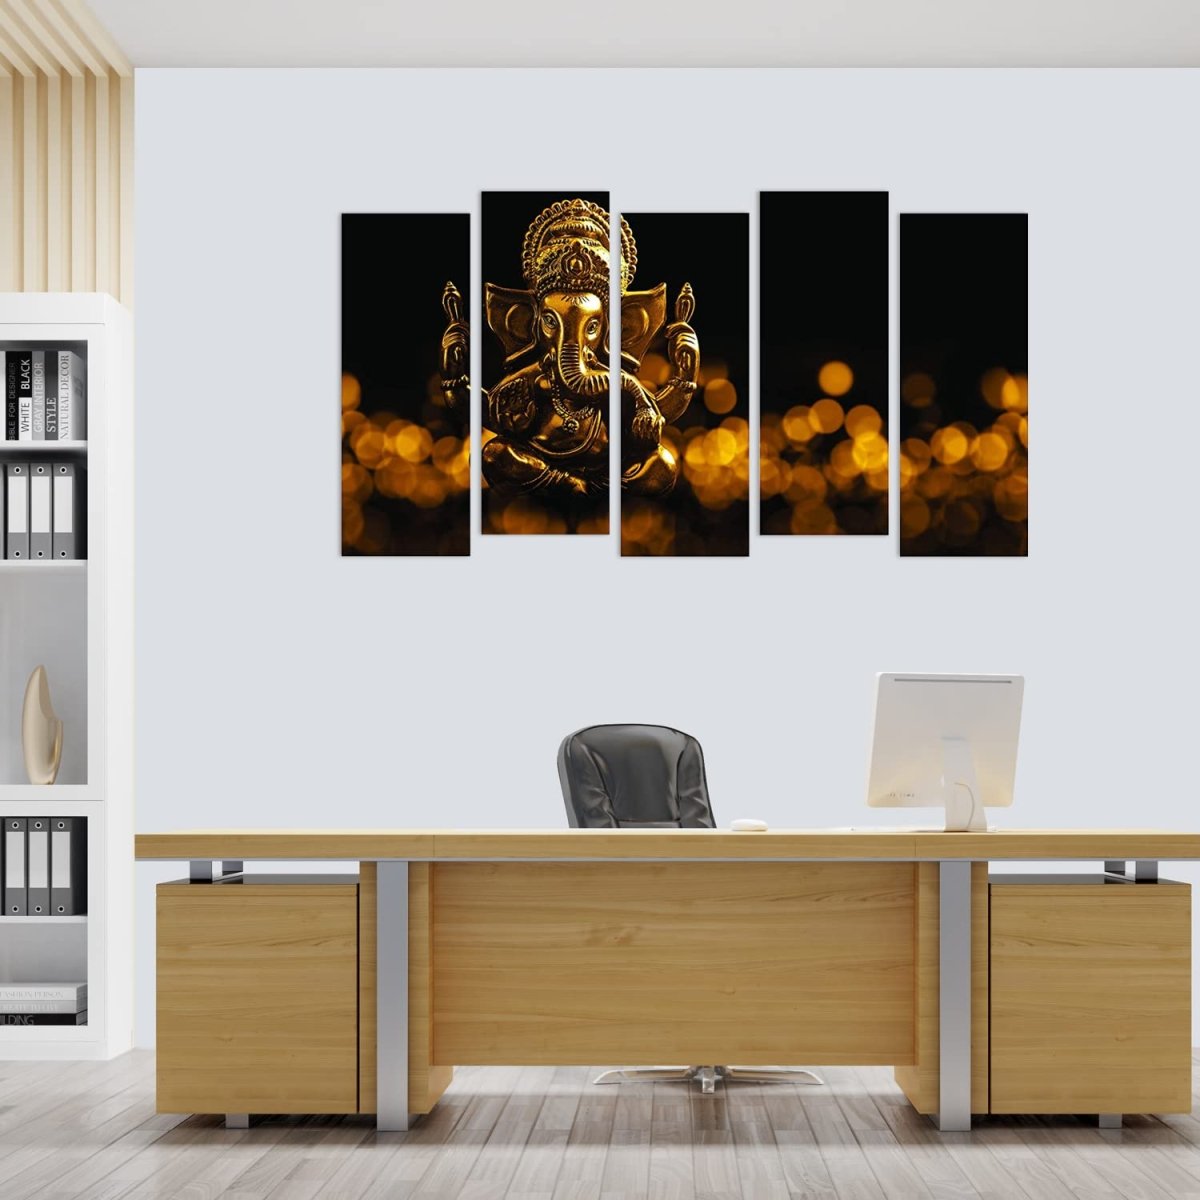 Metalkart Special Ganesha in the Glimmering Dark: A Pentalogue Wall Painting (Set of 5)